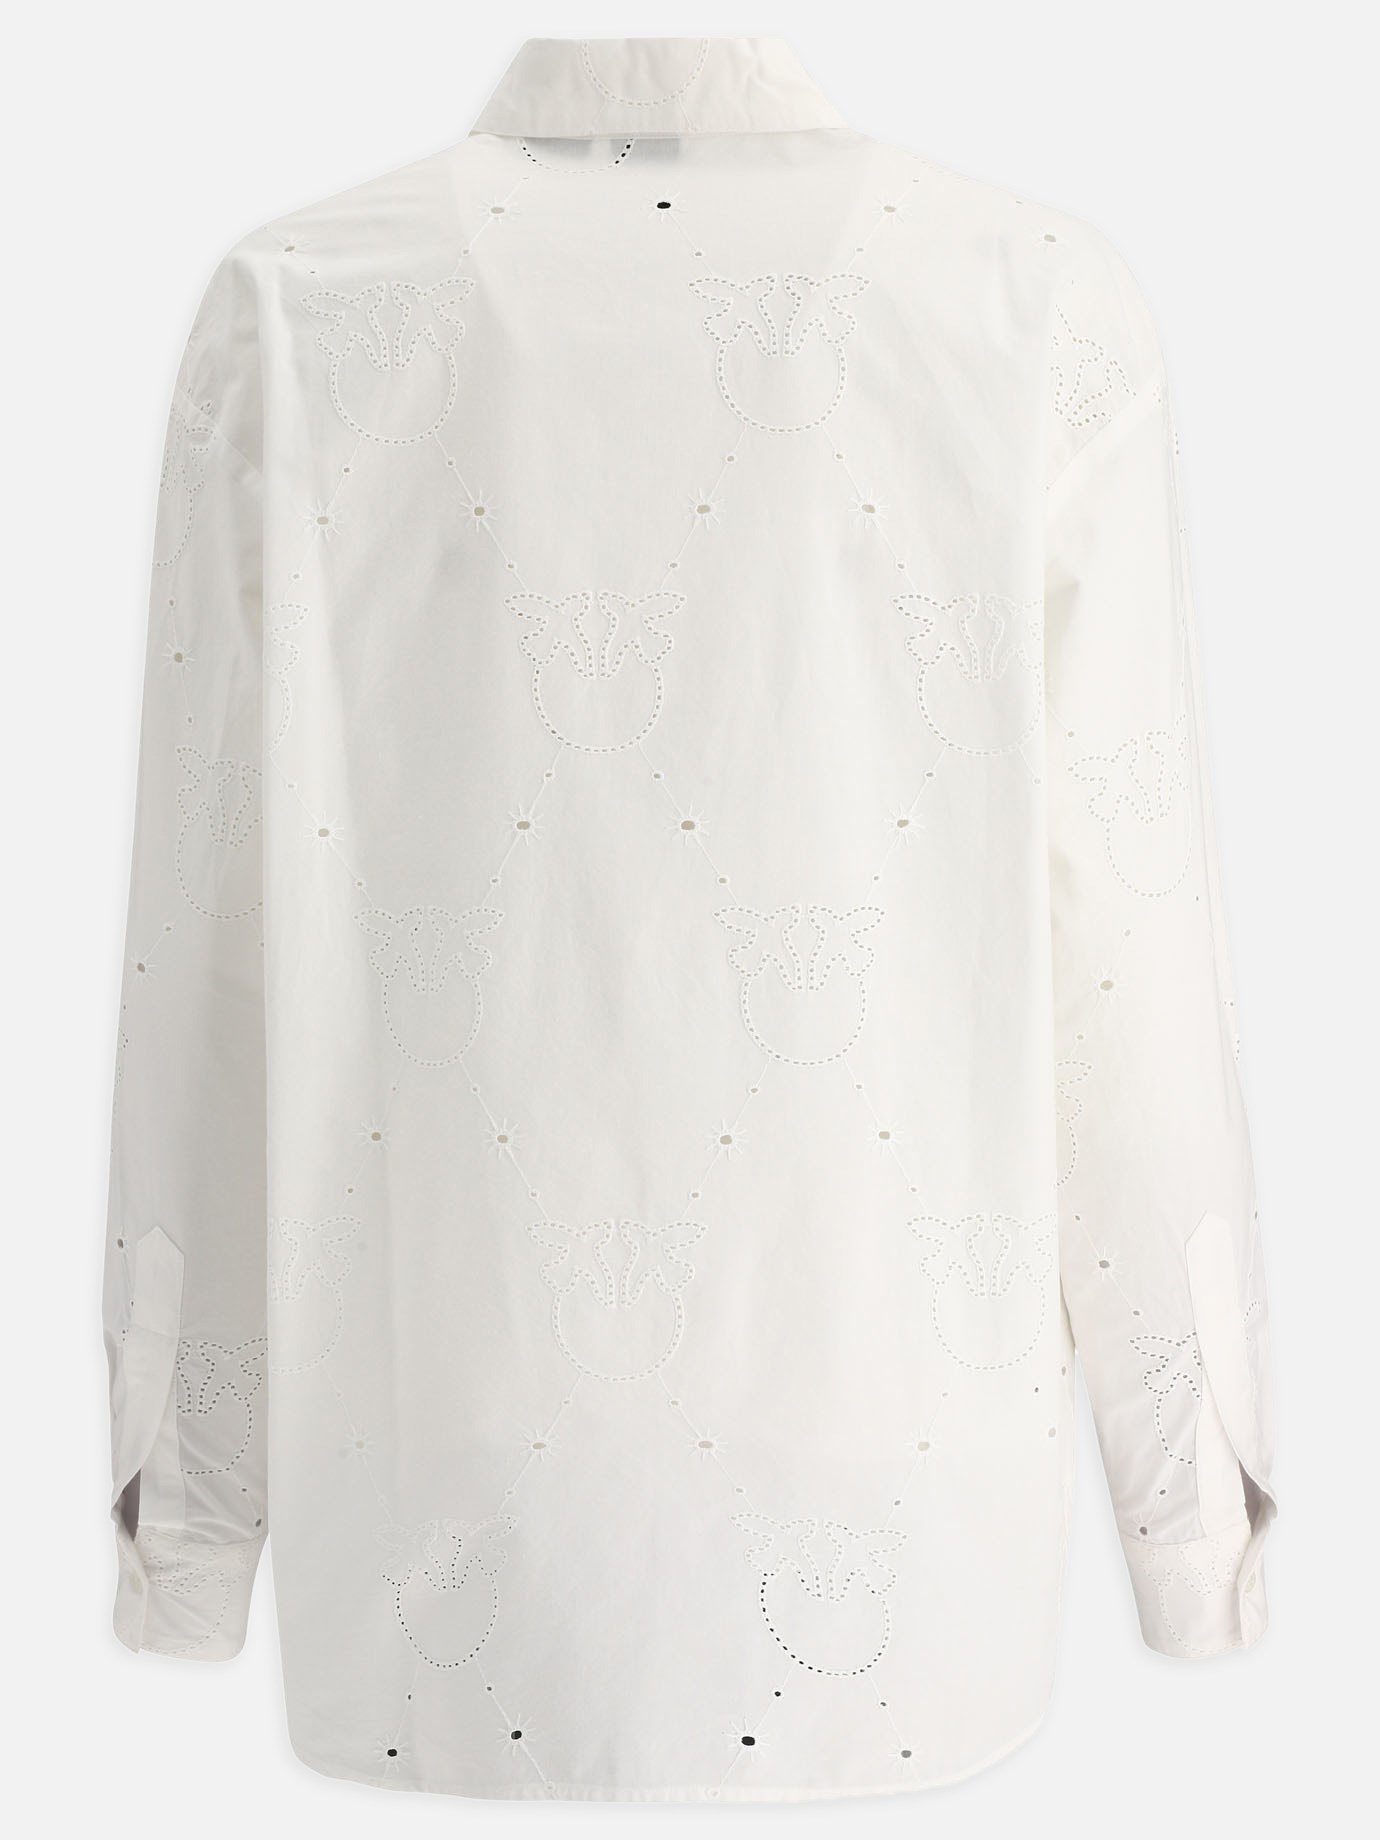  Beethoven  shirt by Pinko